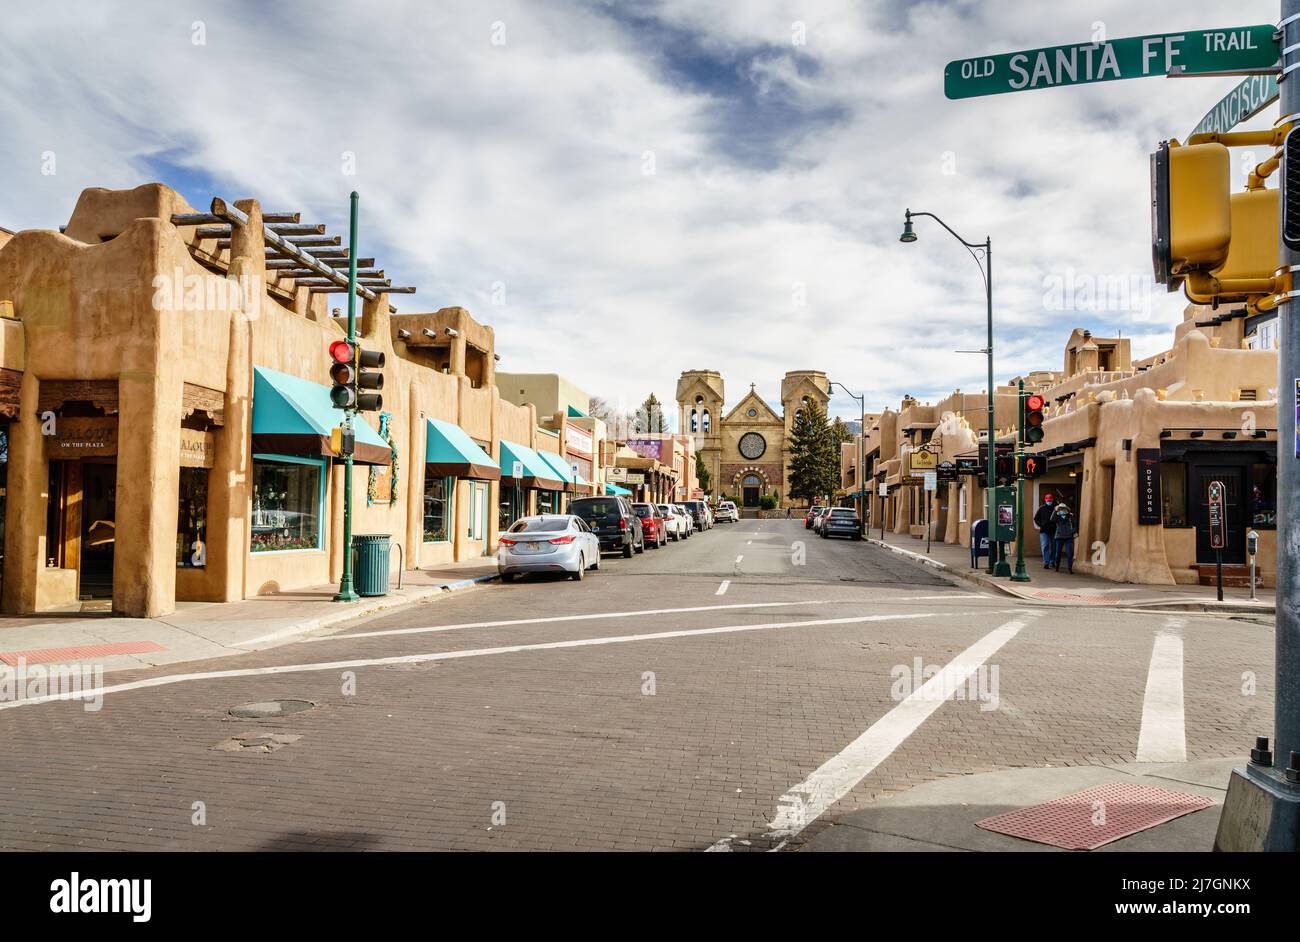 Santa Fe, New Mexico, December 13, 2021: Central street in downtown Santa Fe, NM with a view of Cathedral Basilica of St. Francis of Assisi Stock Photo